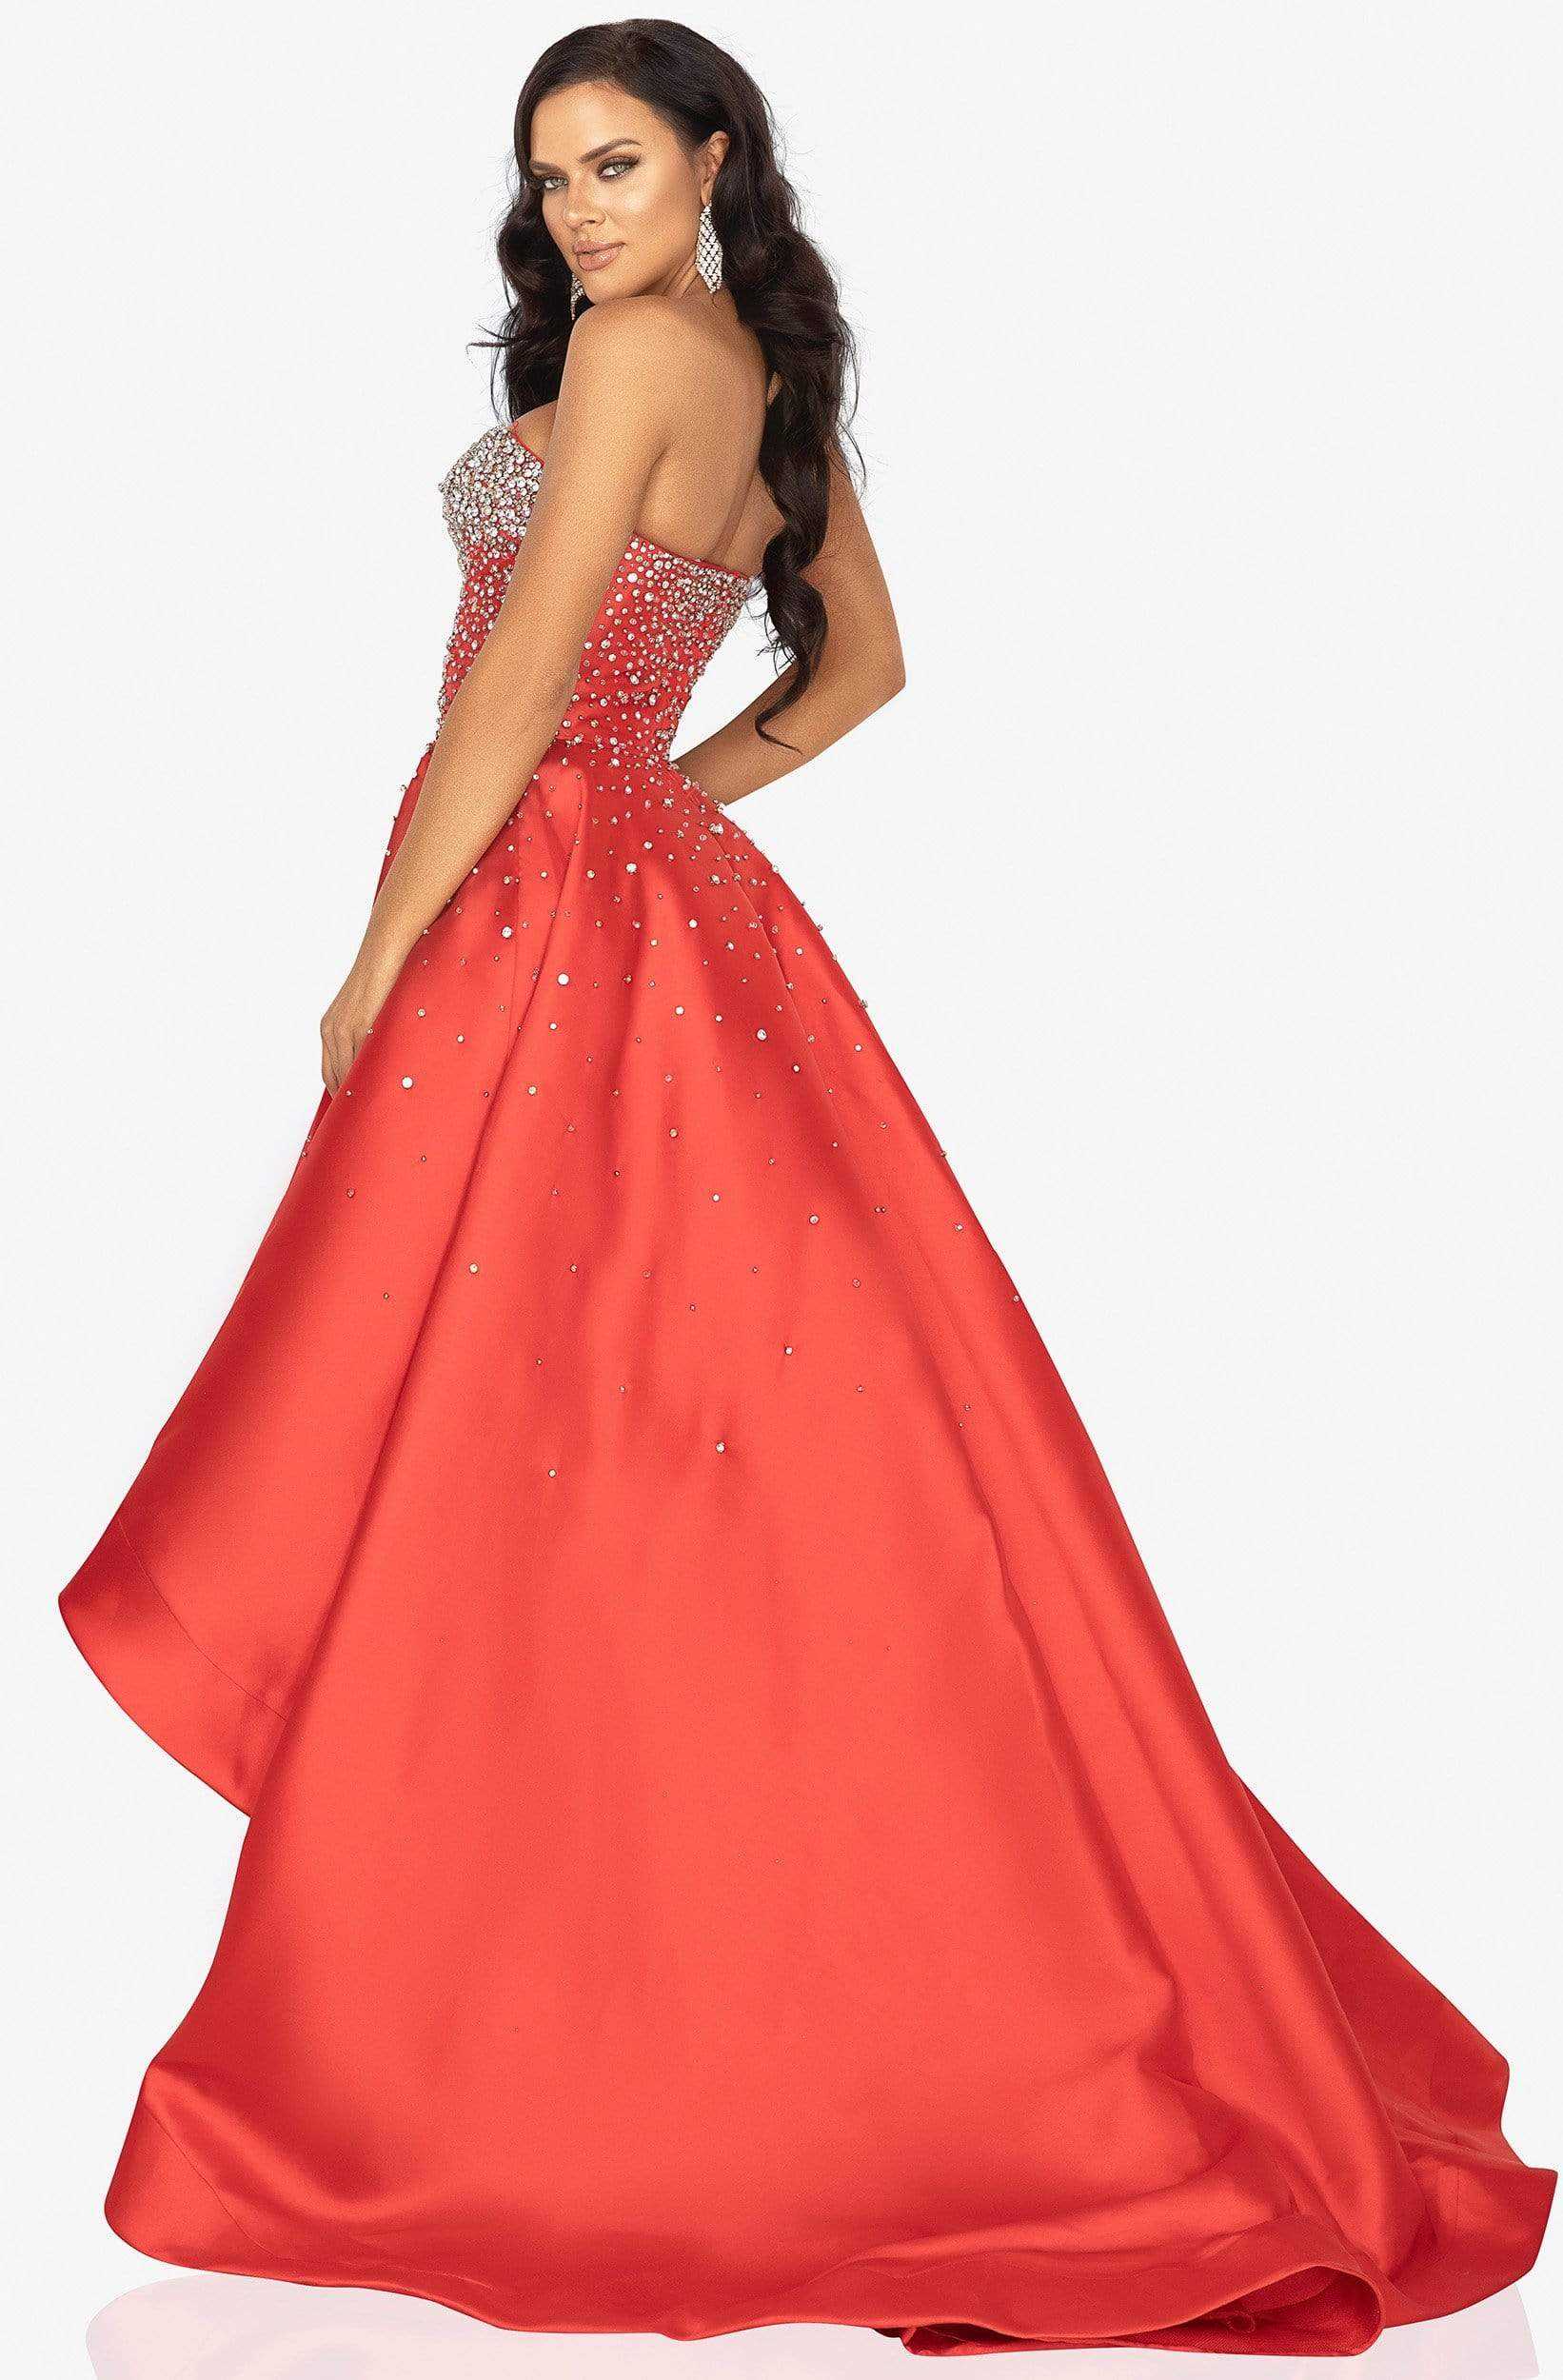 Terani Couture, Terani Couture - 2012P1286 Embellished Sweetheart High Low Aline Dress